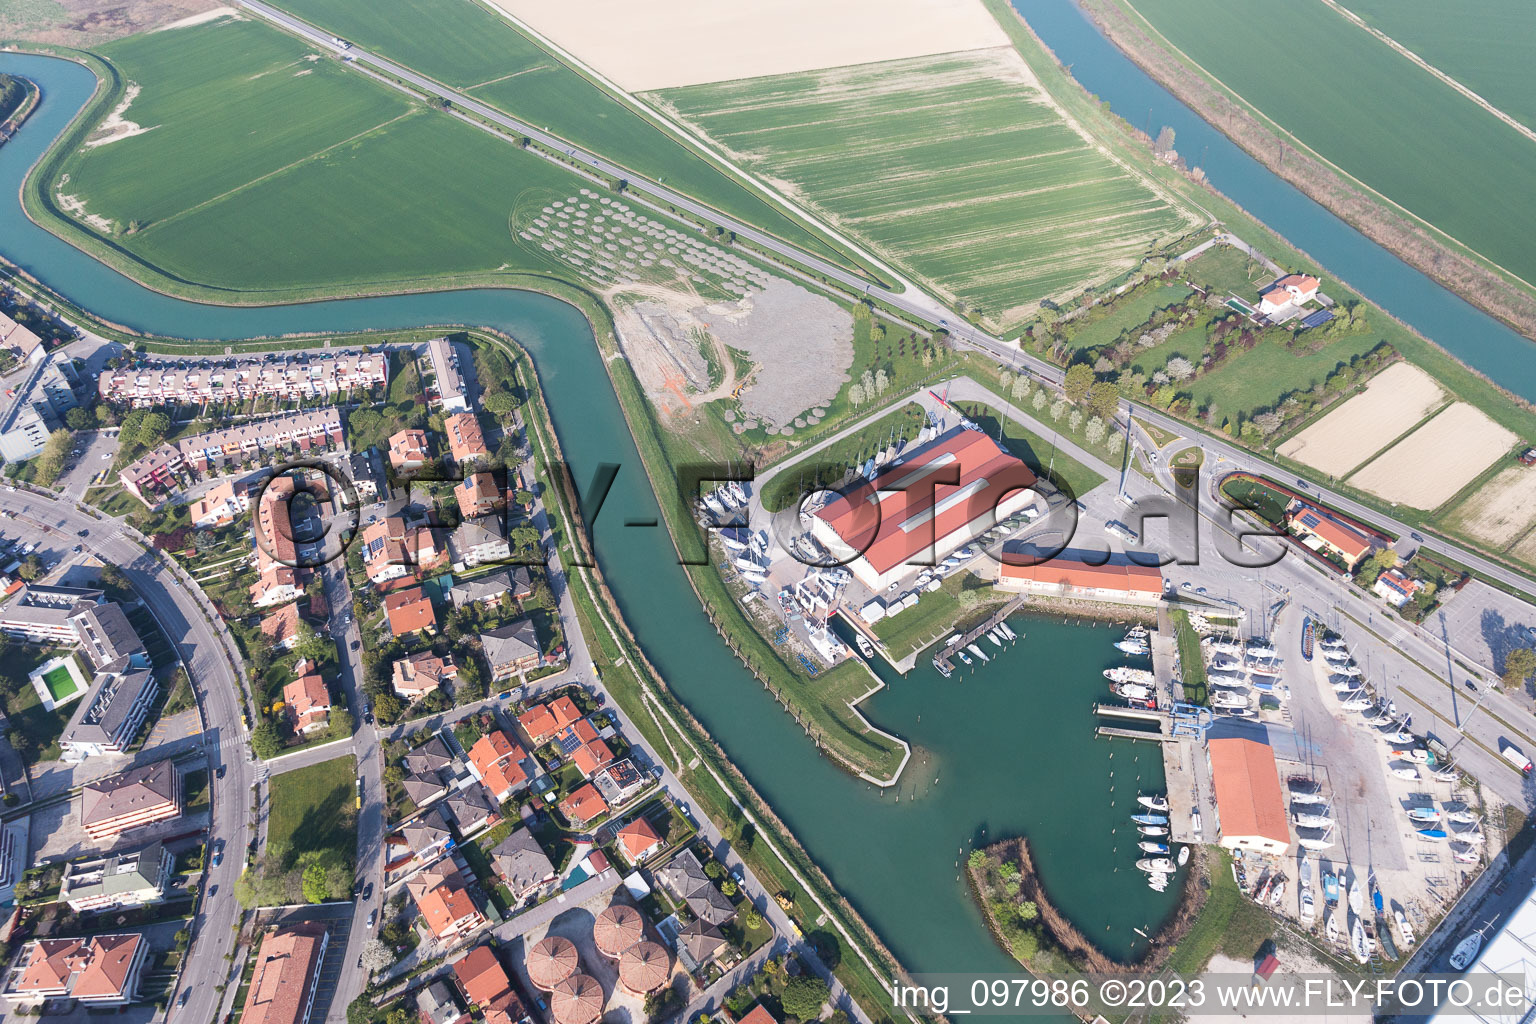 Oblique view of Caorle in the state Veneto, Italy